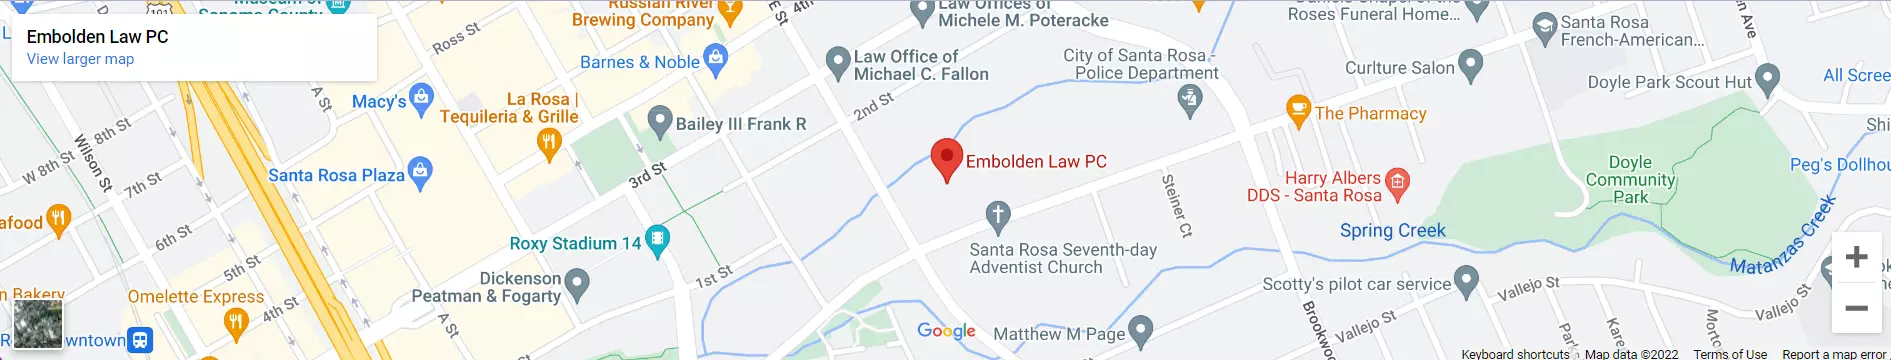 Embolden Law PC Office Location